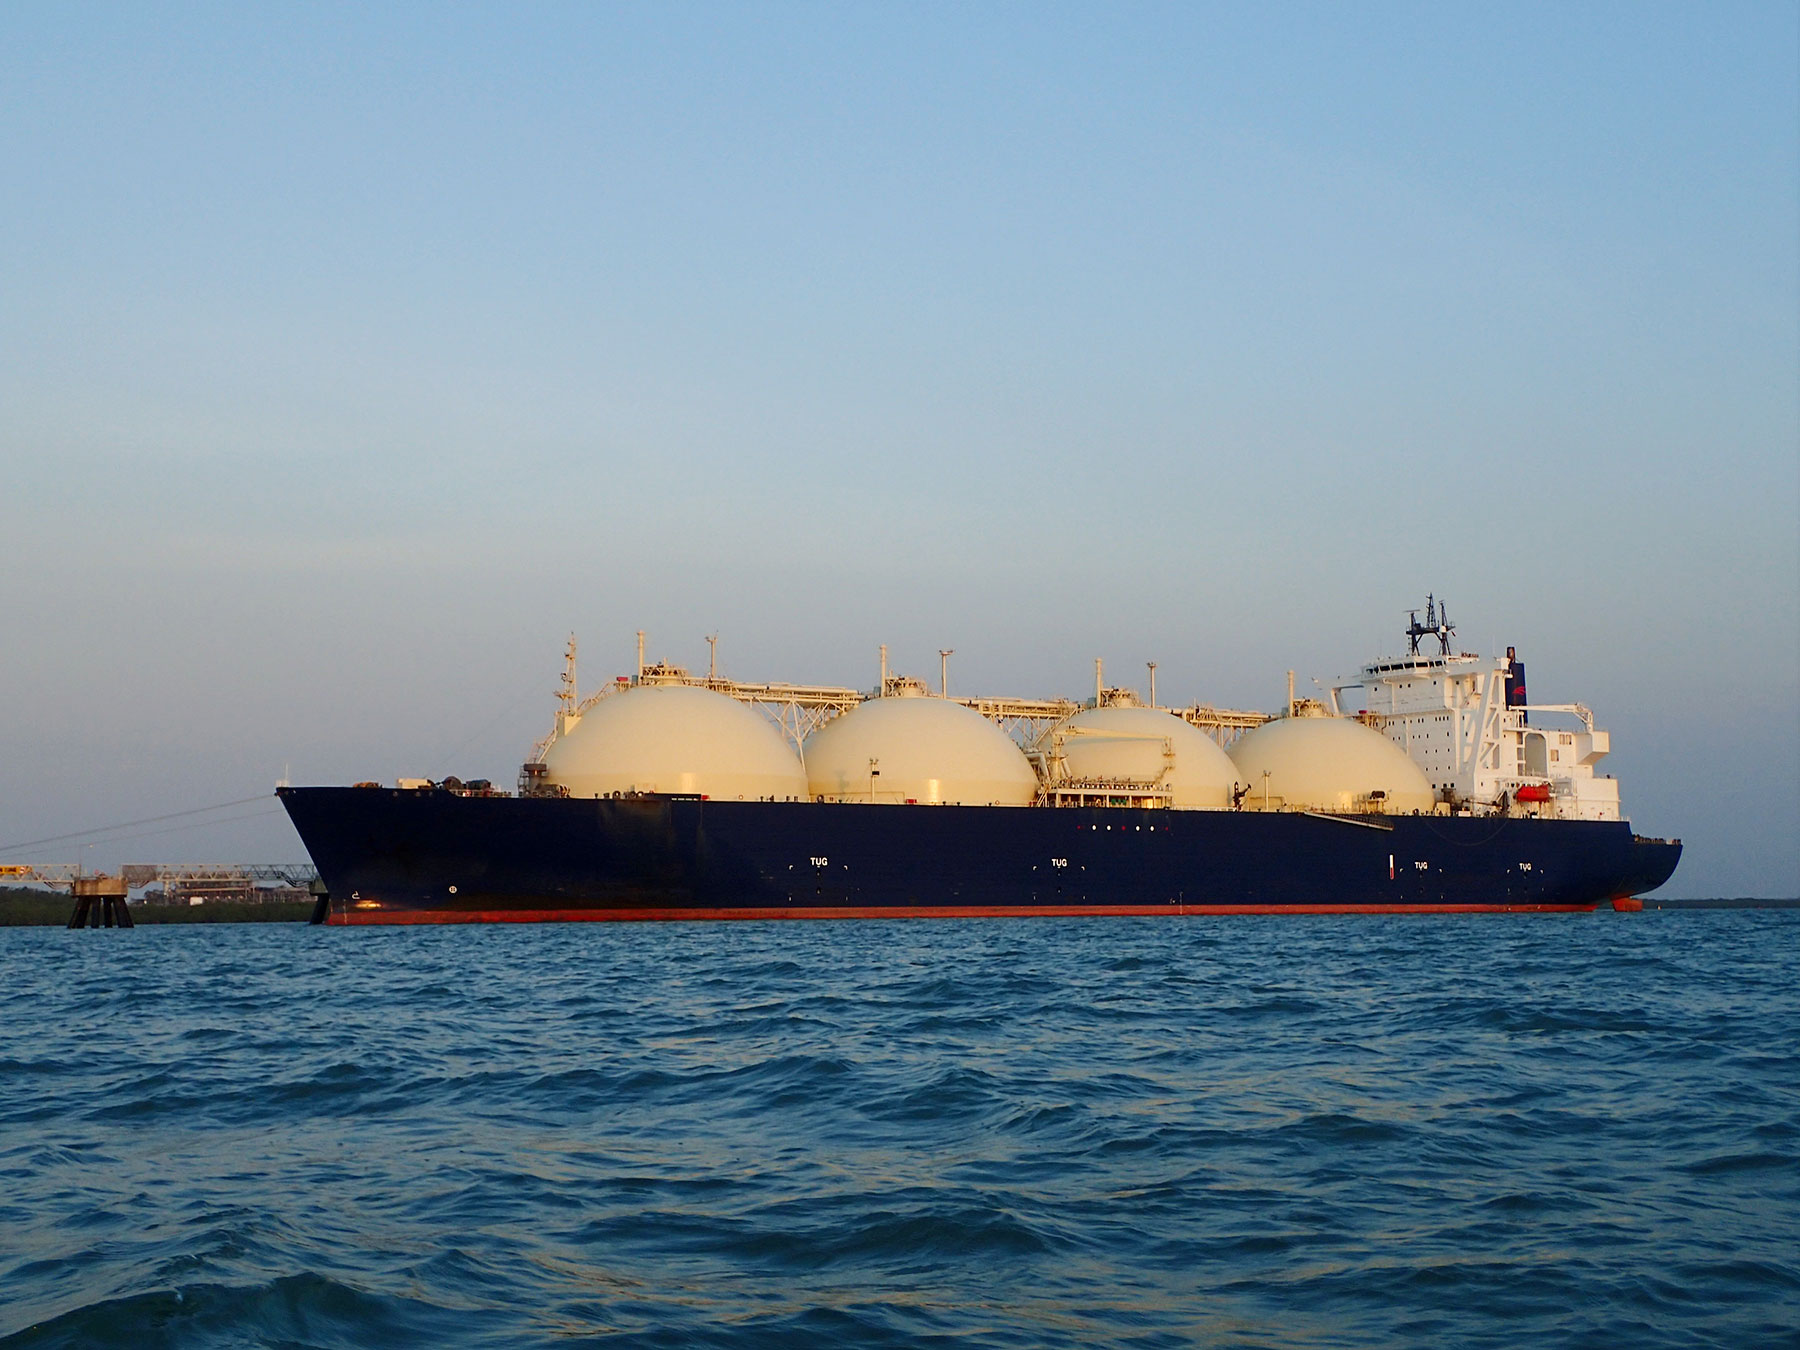 Ichthys Onshore LNG Facility